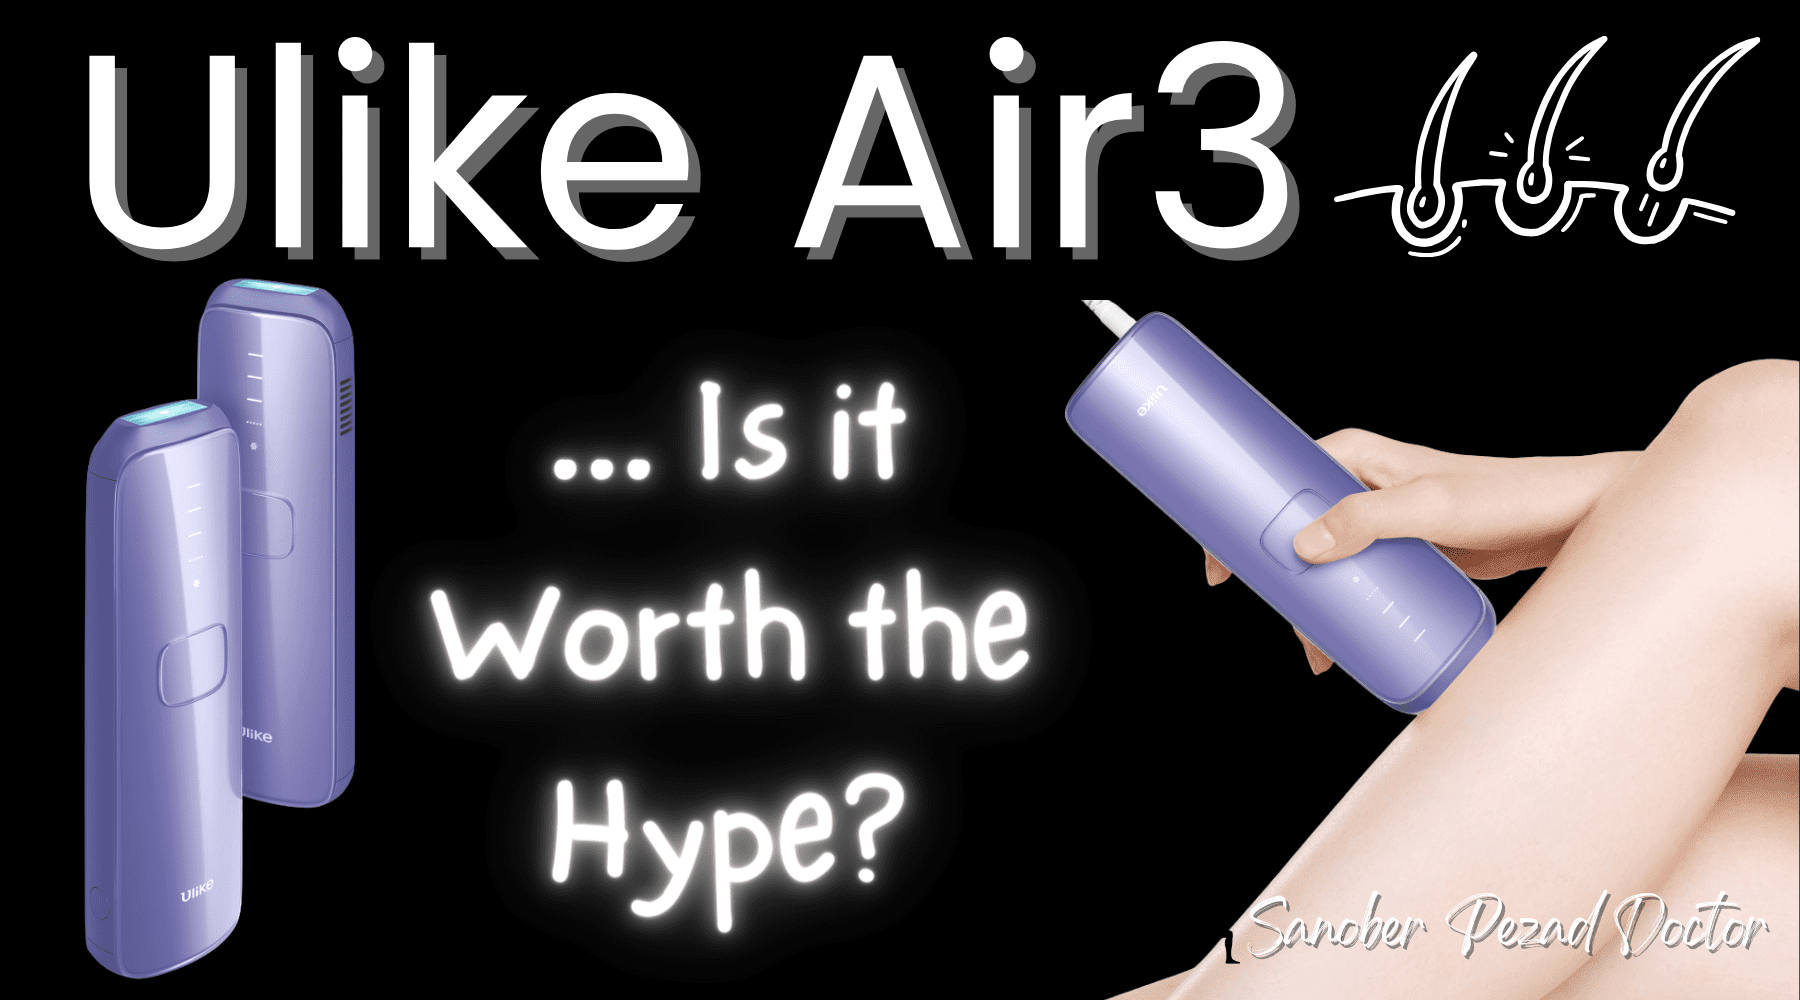 Ulike Air3 28 day clinical study review